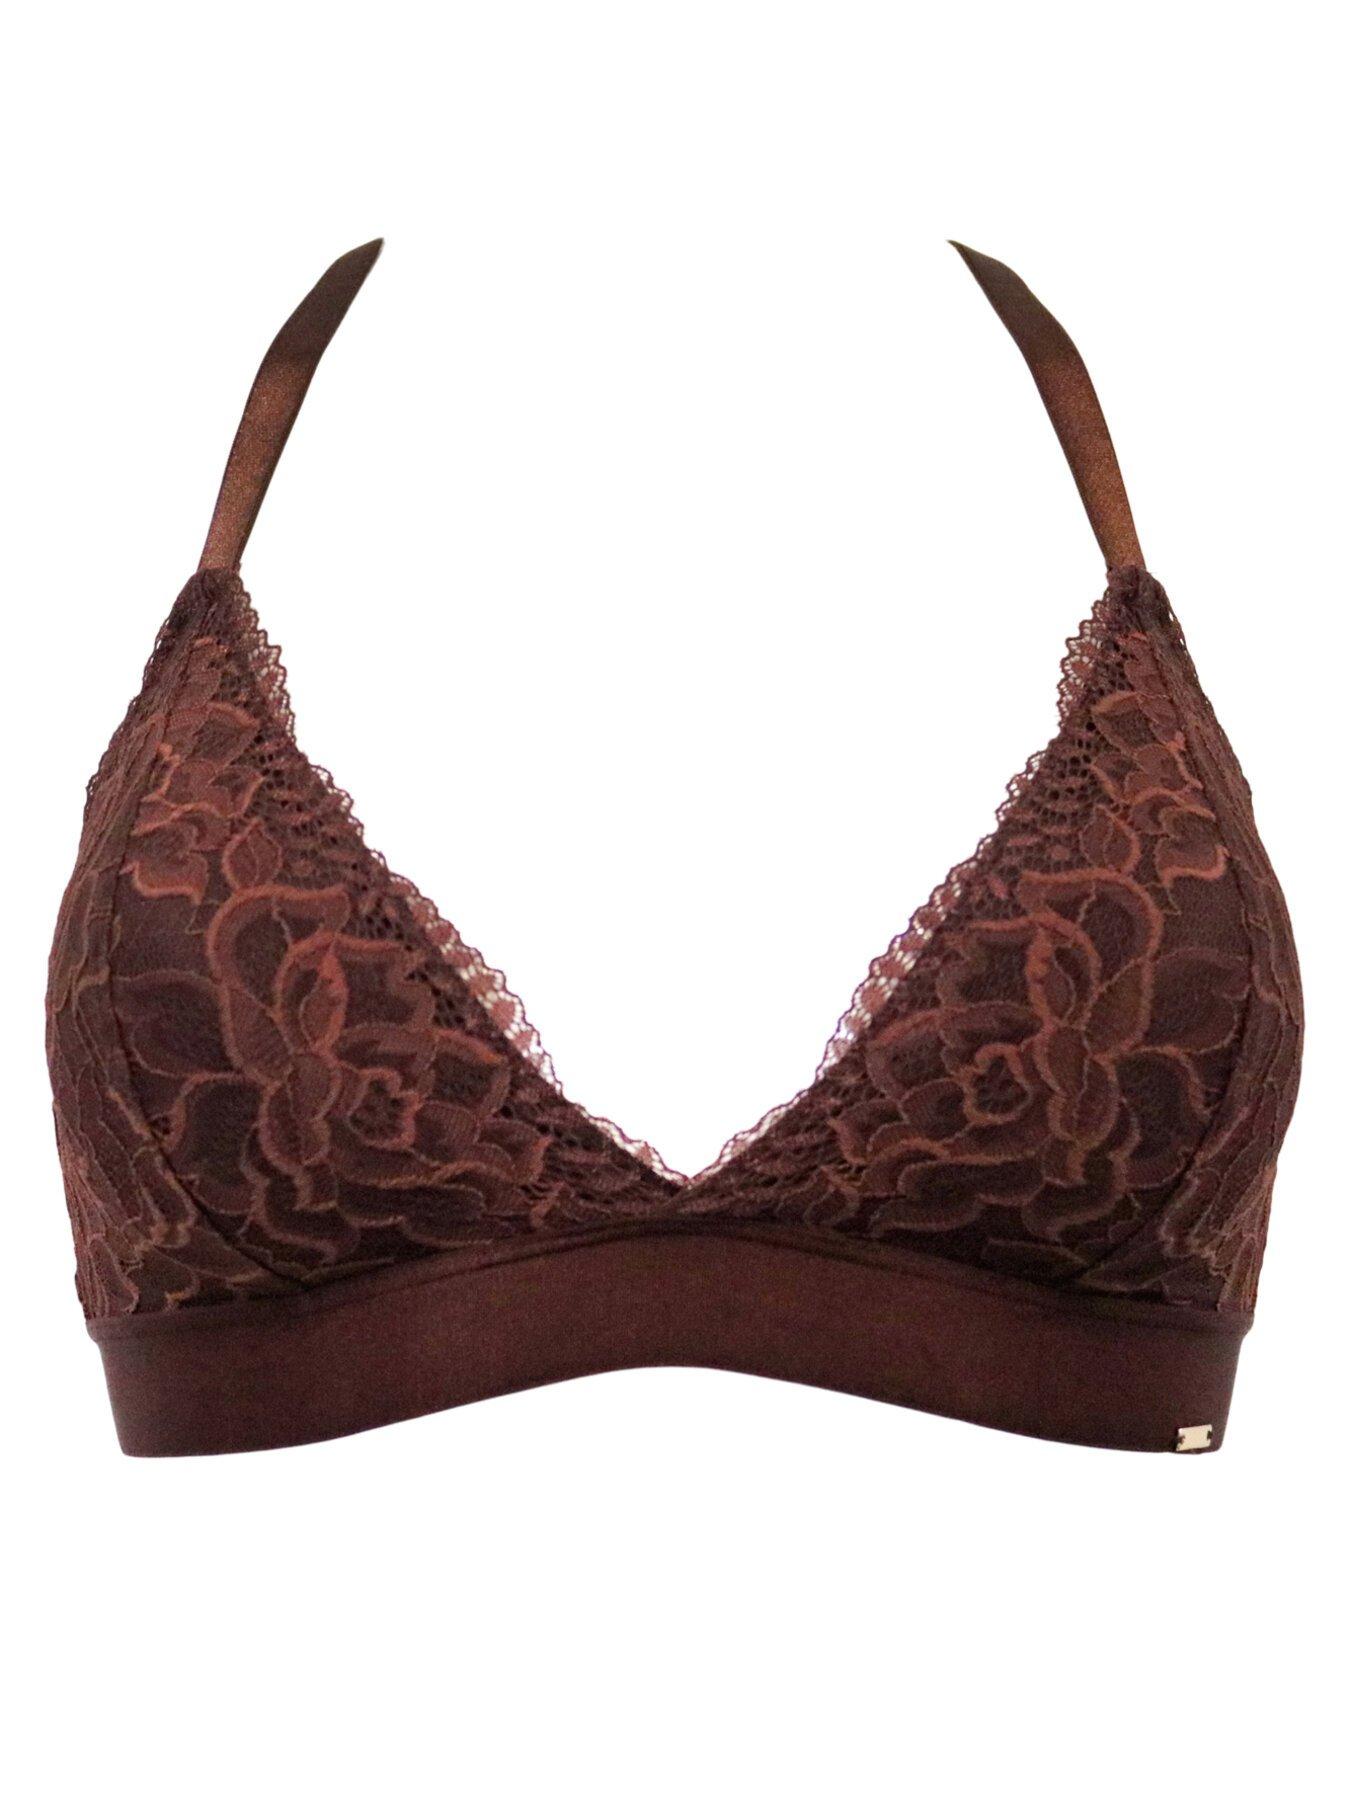 Women's Lace Removable Pad Bralette - India